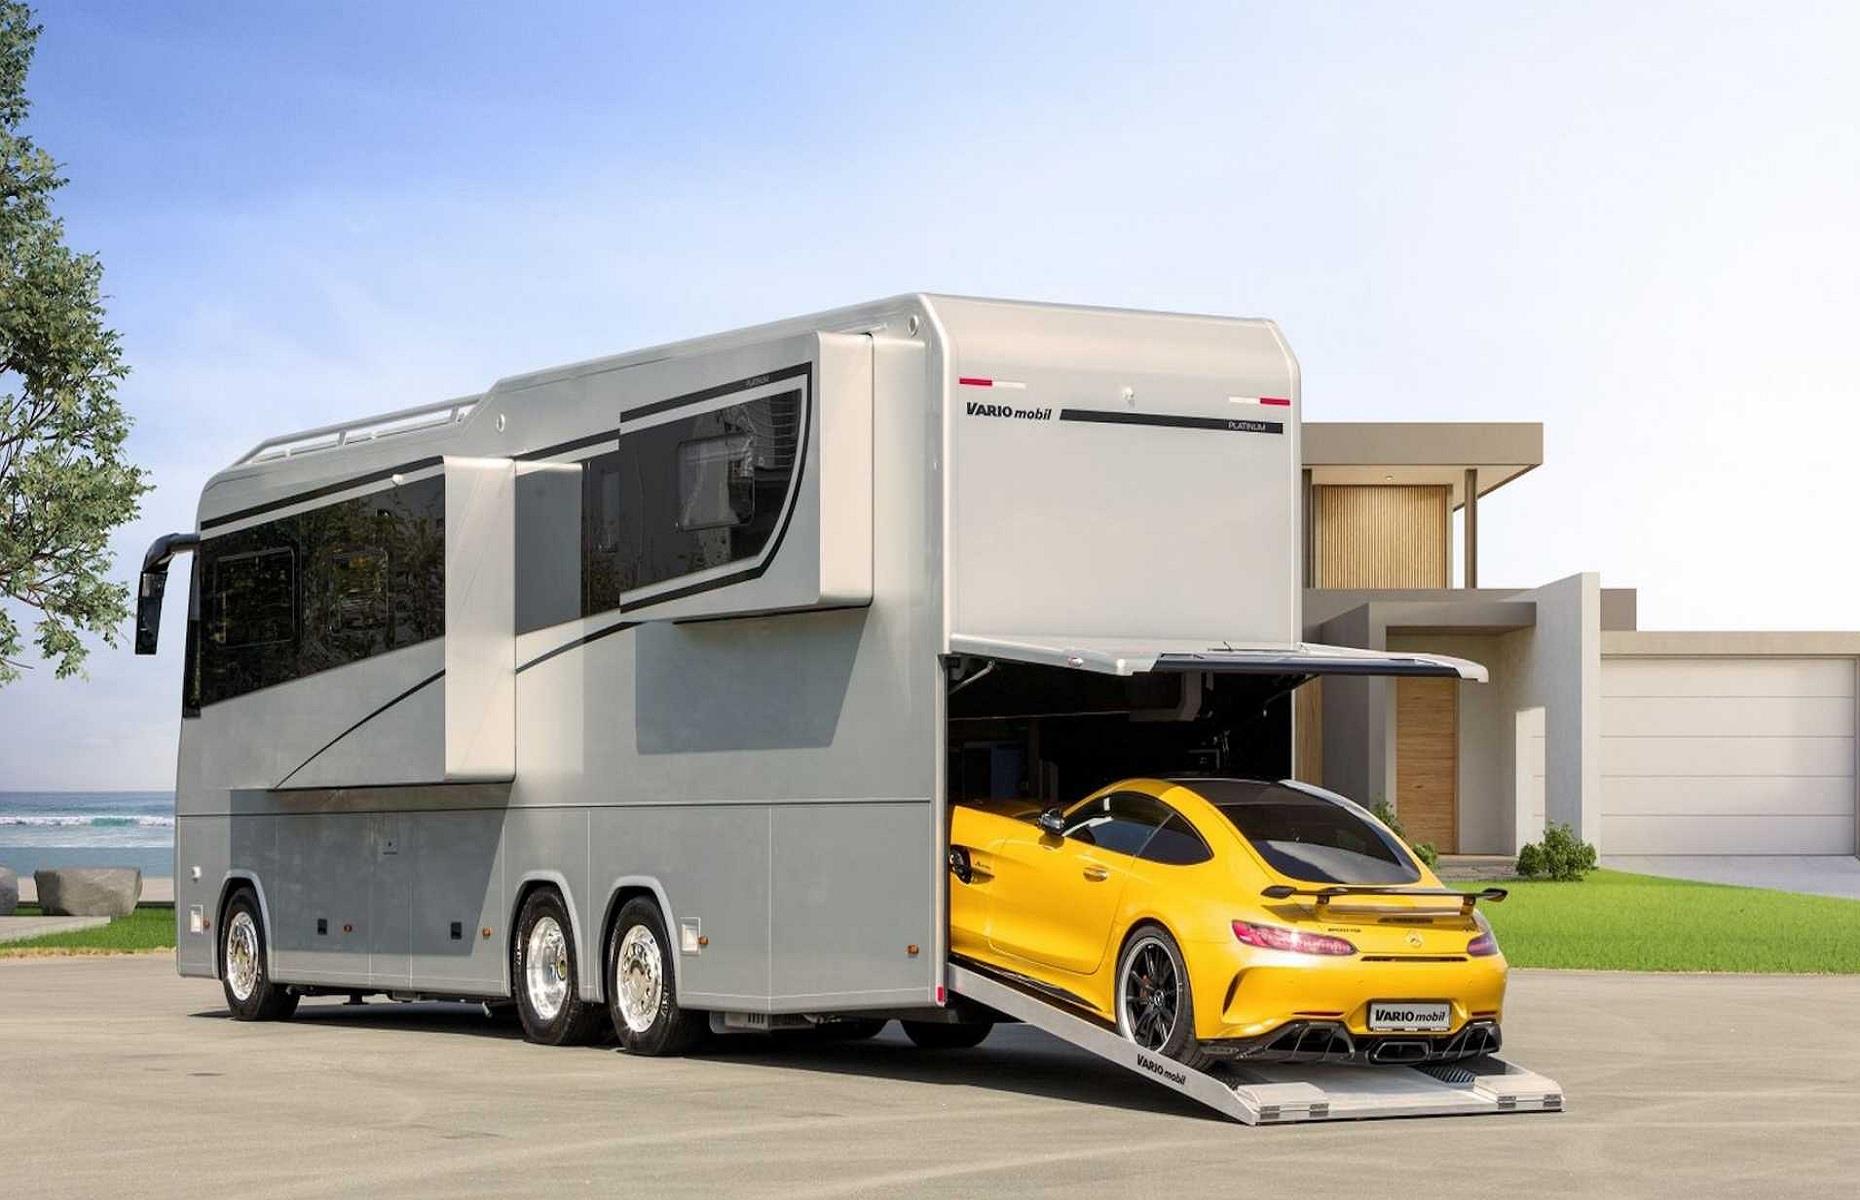 <p>Described by <a href="https://newatlas.com/automotive/vario-perfect-1200-motorhome/">New Atlas</a> as a piece of 'exclusive real estate' built onto a triple-axle Mercedes chassis, the 1200 boasts a true stretch of living space, expanded further by three electro-hydraulic slide-outs and enhanced with nightclub-grade audio and intelligent lighting. What’s more, you’ll find an XXL rear garage, allowing you to take your supercar with you wherever you go. How's that for <a href="https://www.loveproperty.com/gallerylist/84510/billionaire-bling-these-are-the-most-luxurious-homes-in-the-world">billionaire bling</a>?</p>